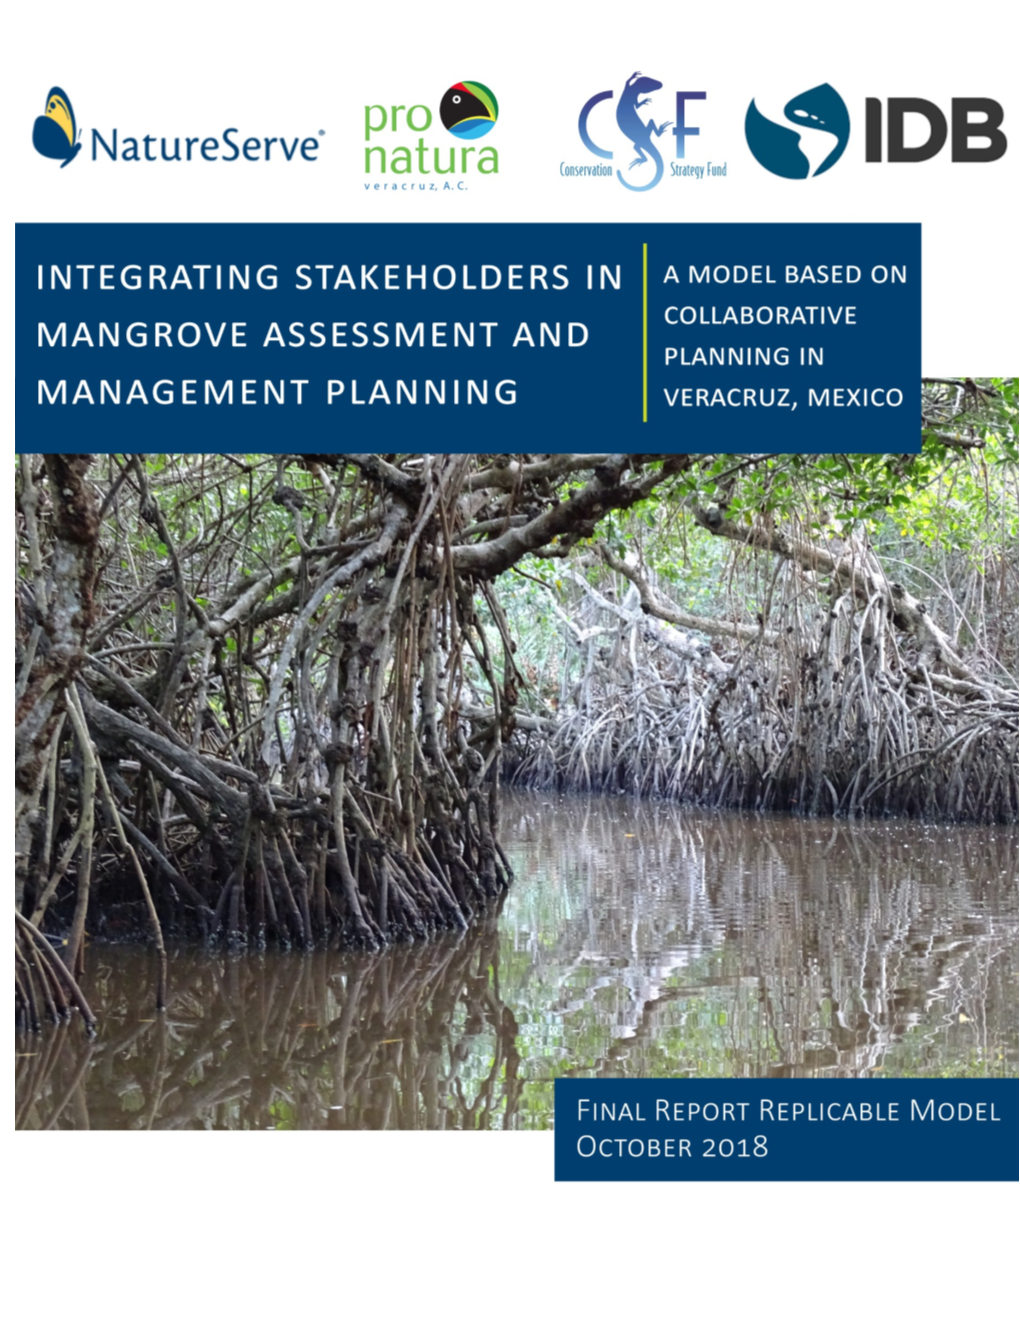 Integrating Stakeholders in Mangrove Assessments and Management Planning: a Model Based on Collaborative Planning in Veracruz, Mexico